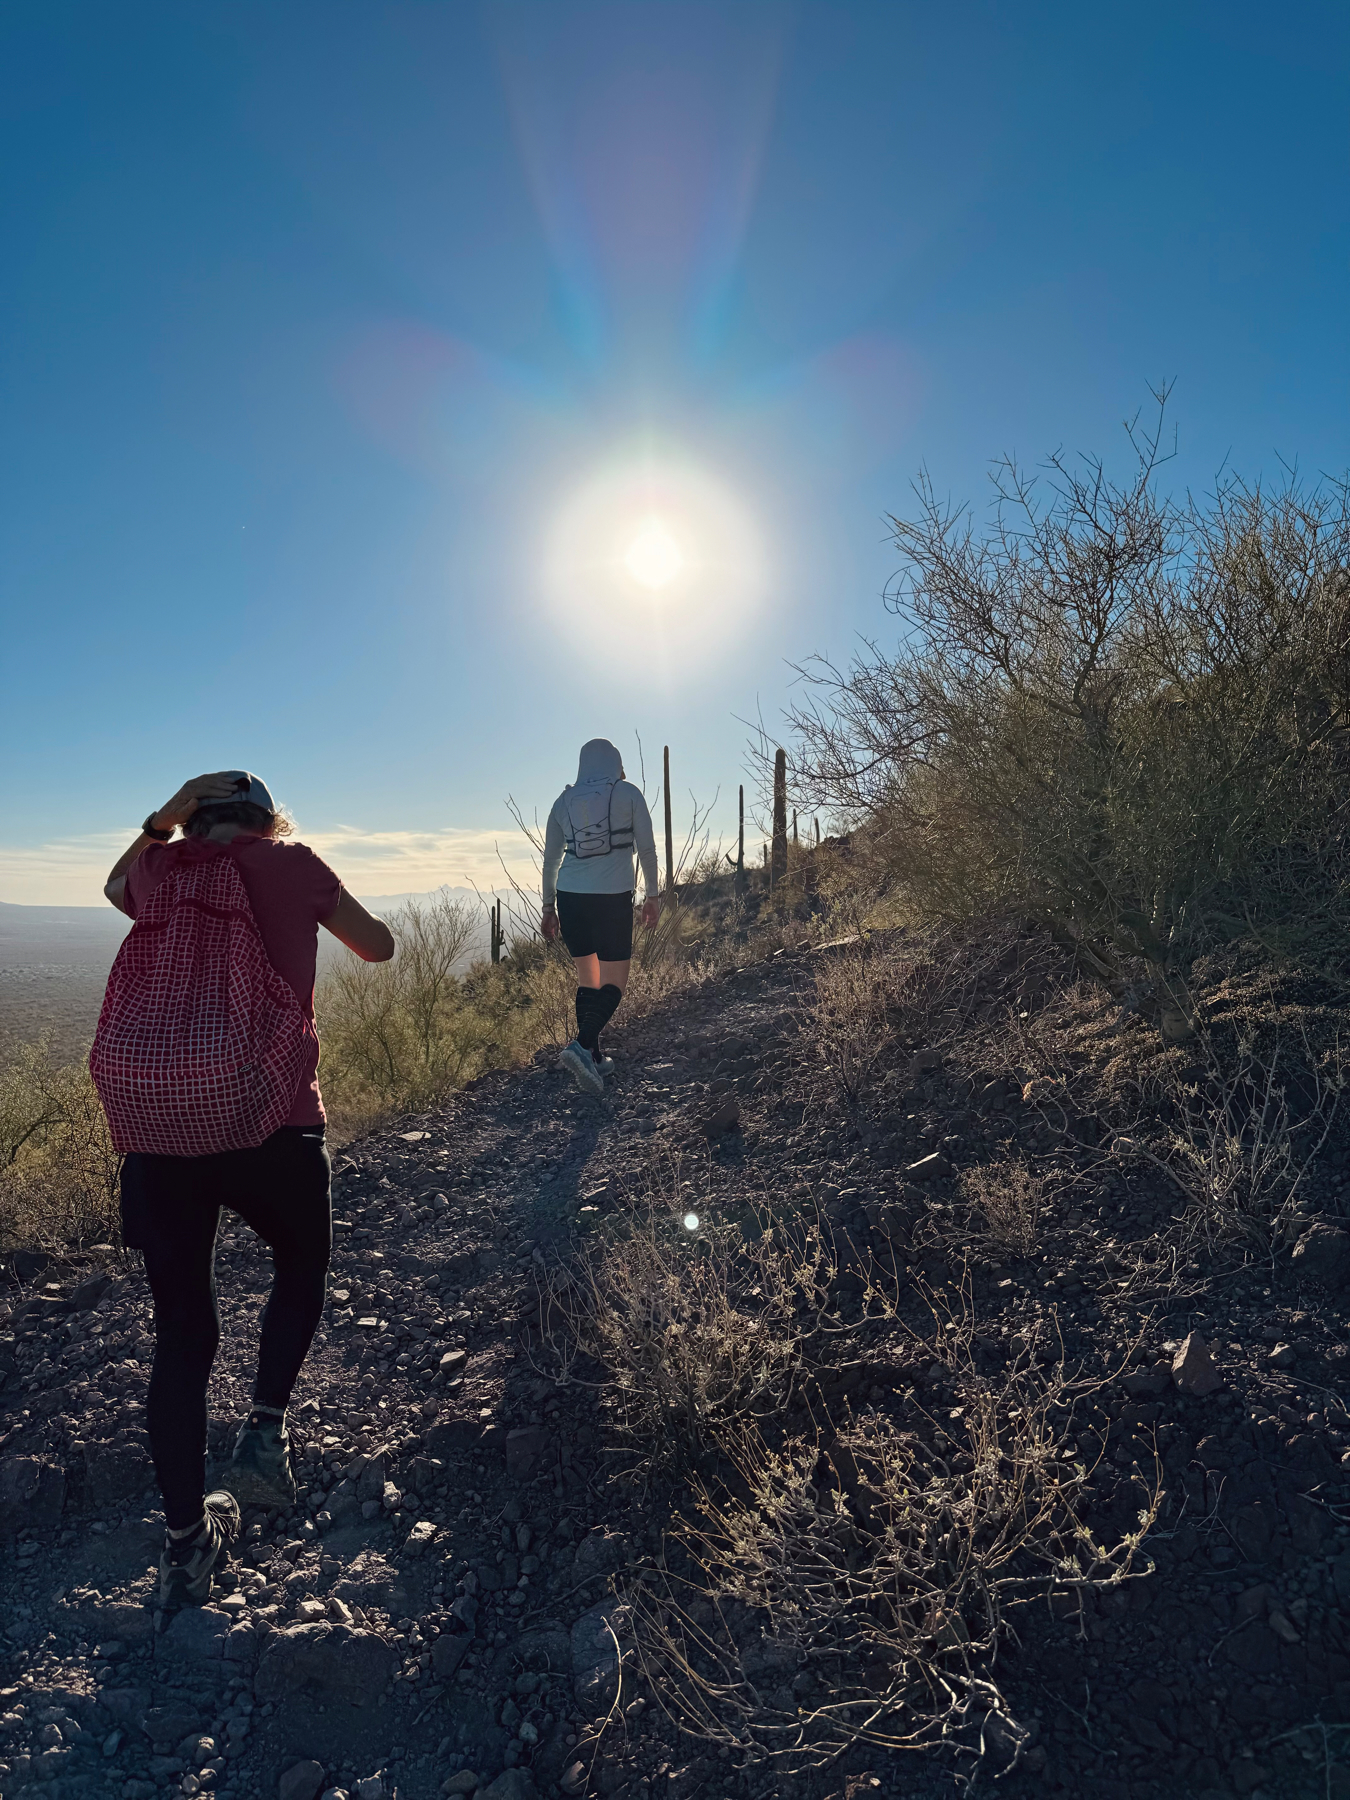 Two hikers ascending a rocky trail with sparse desert vegetation under a bright sun with visible lens flare.